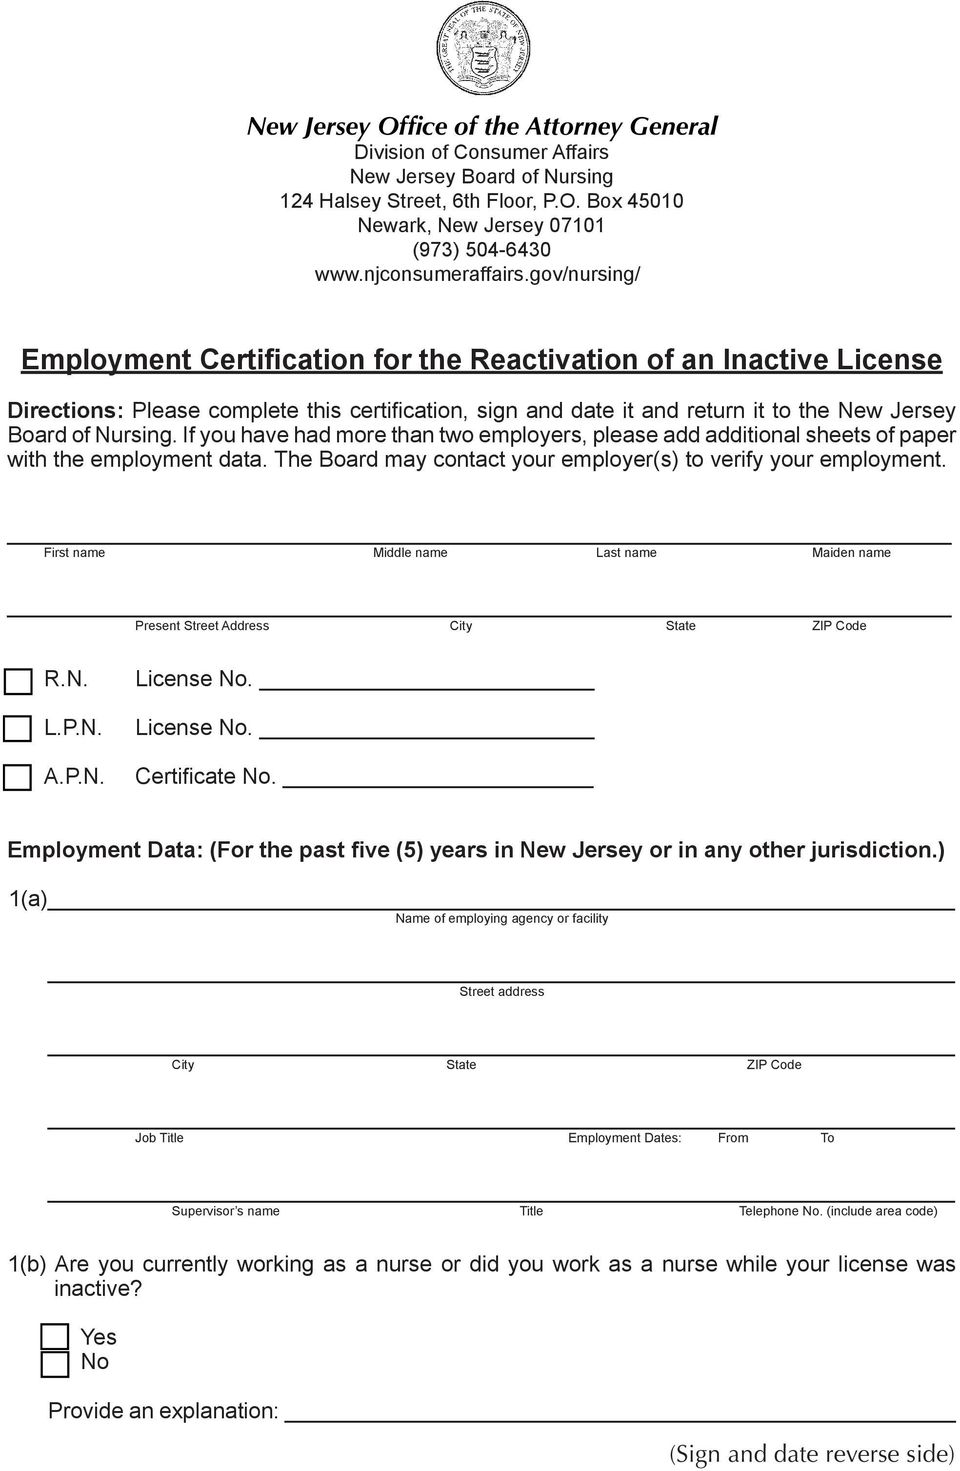 If you have had more than two employers, please add additional sheets of paper with the employment data. The Board may contact your employer(s) to verify your employment.